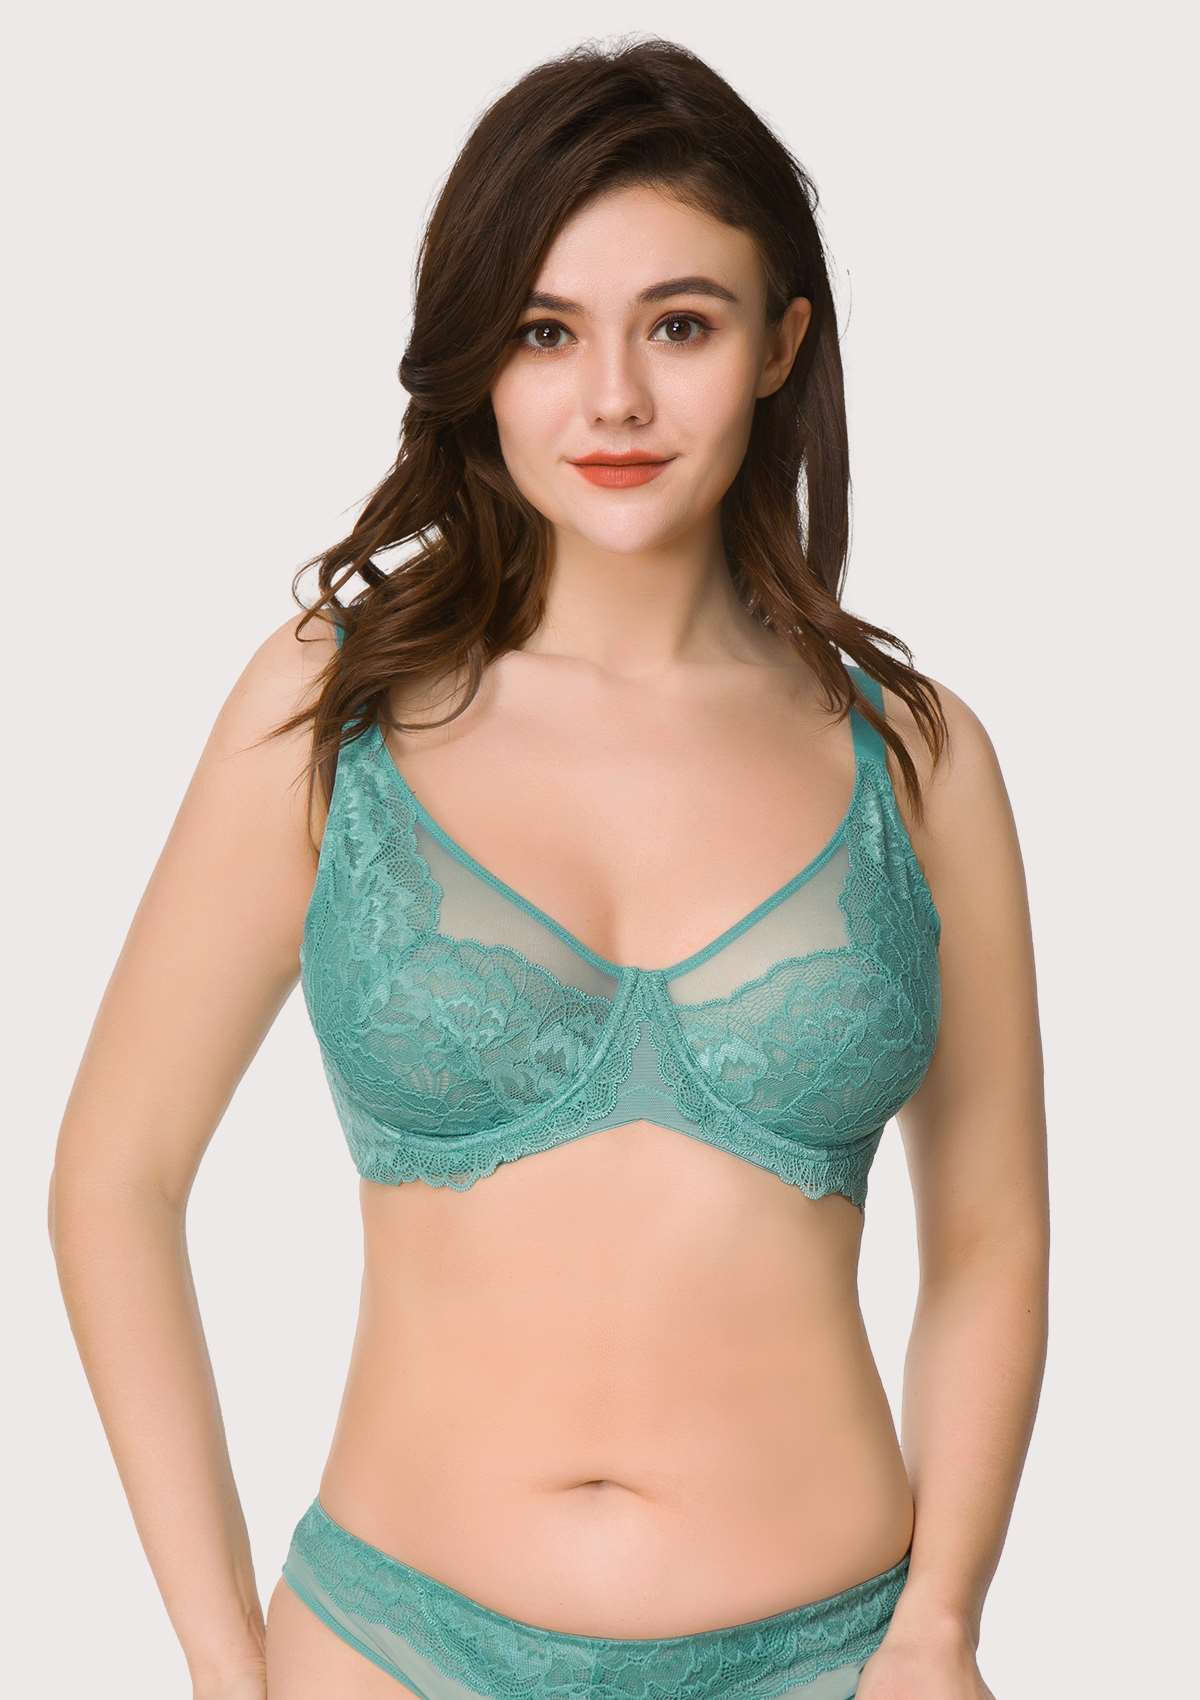 HSIA Peony Lace Unlined Supportive Underwire Bra - Dark Blue / 38 / C